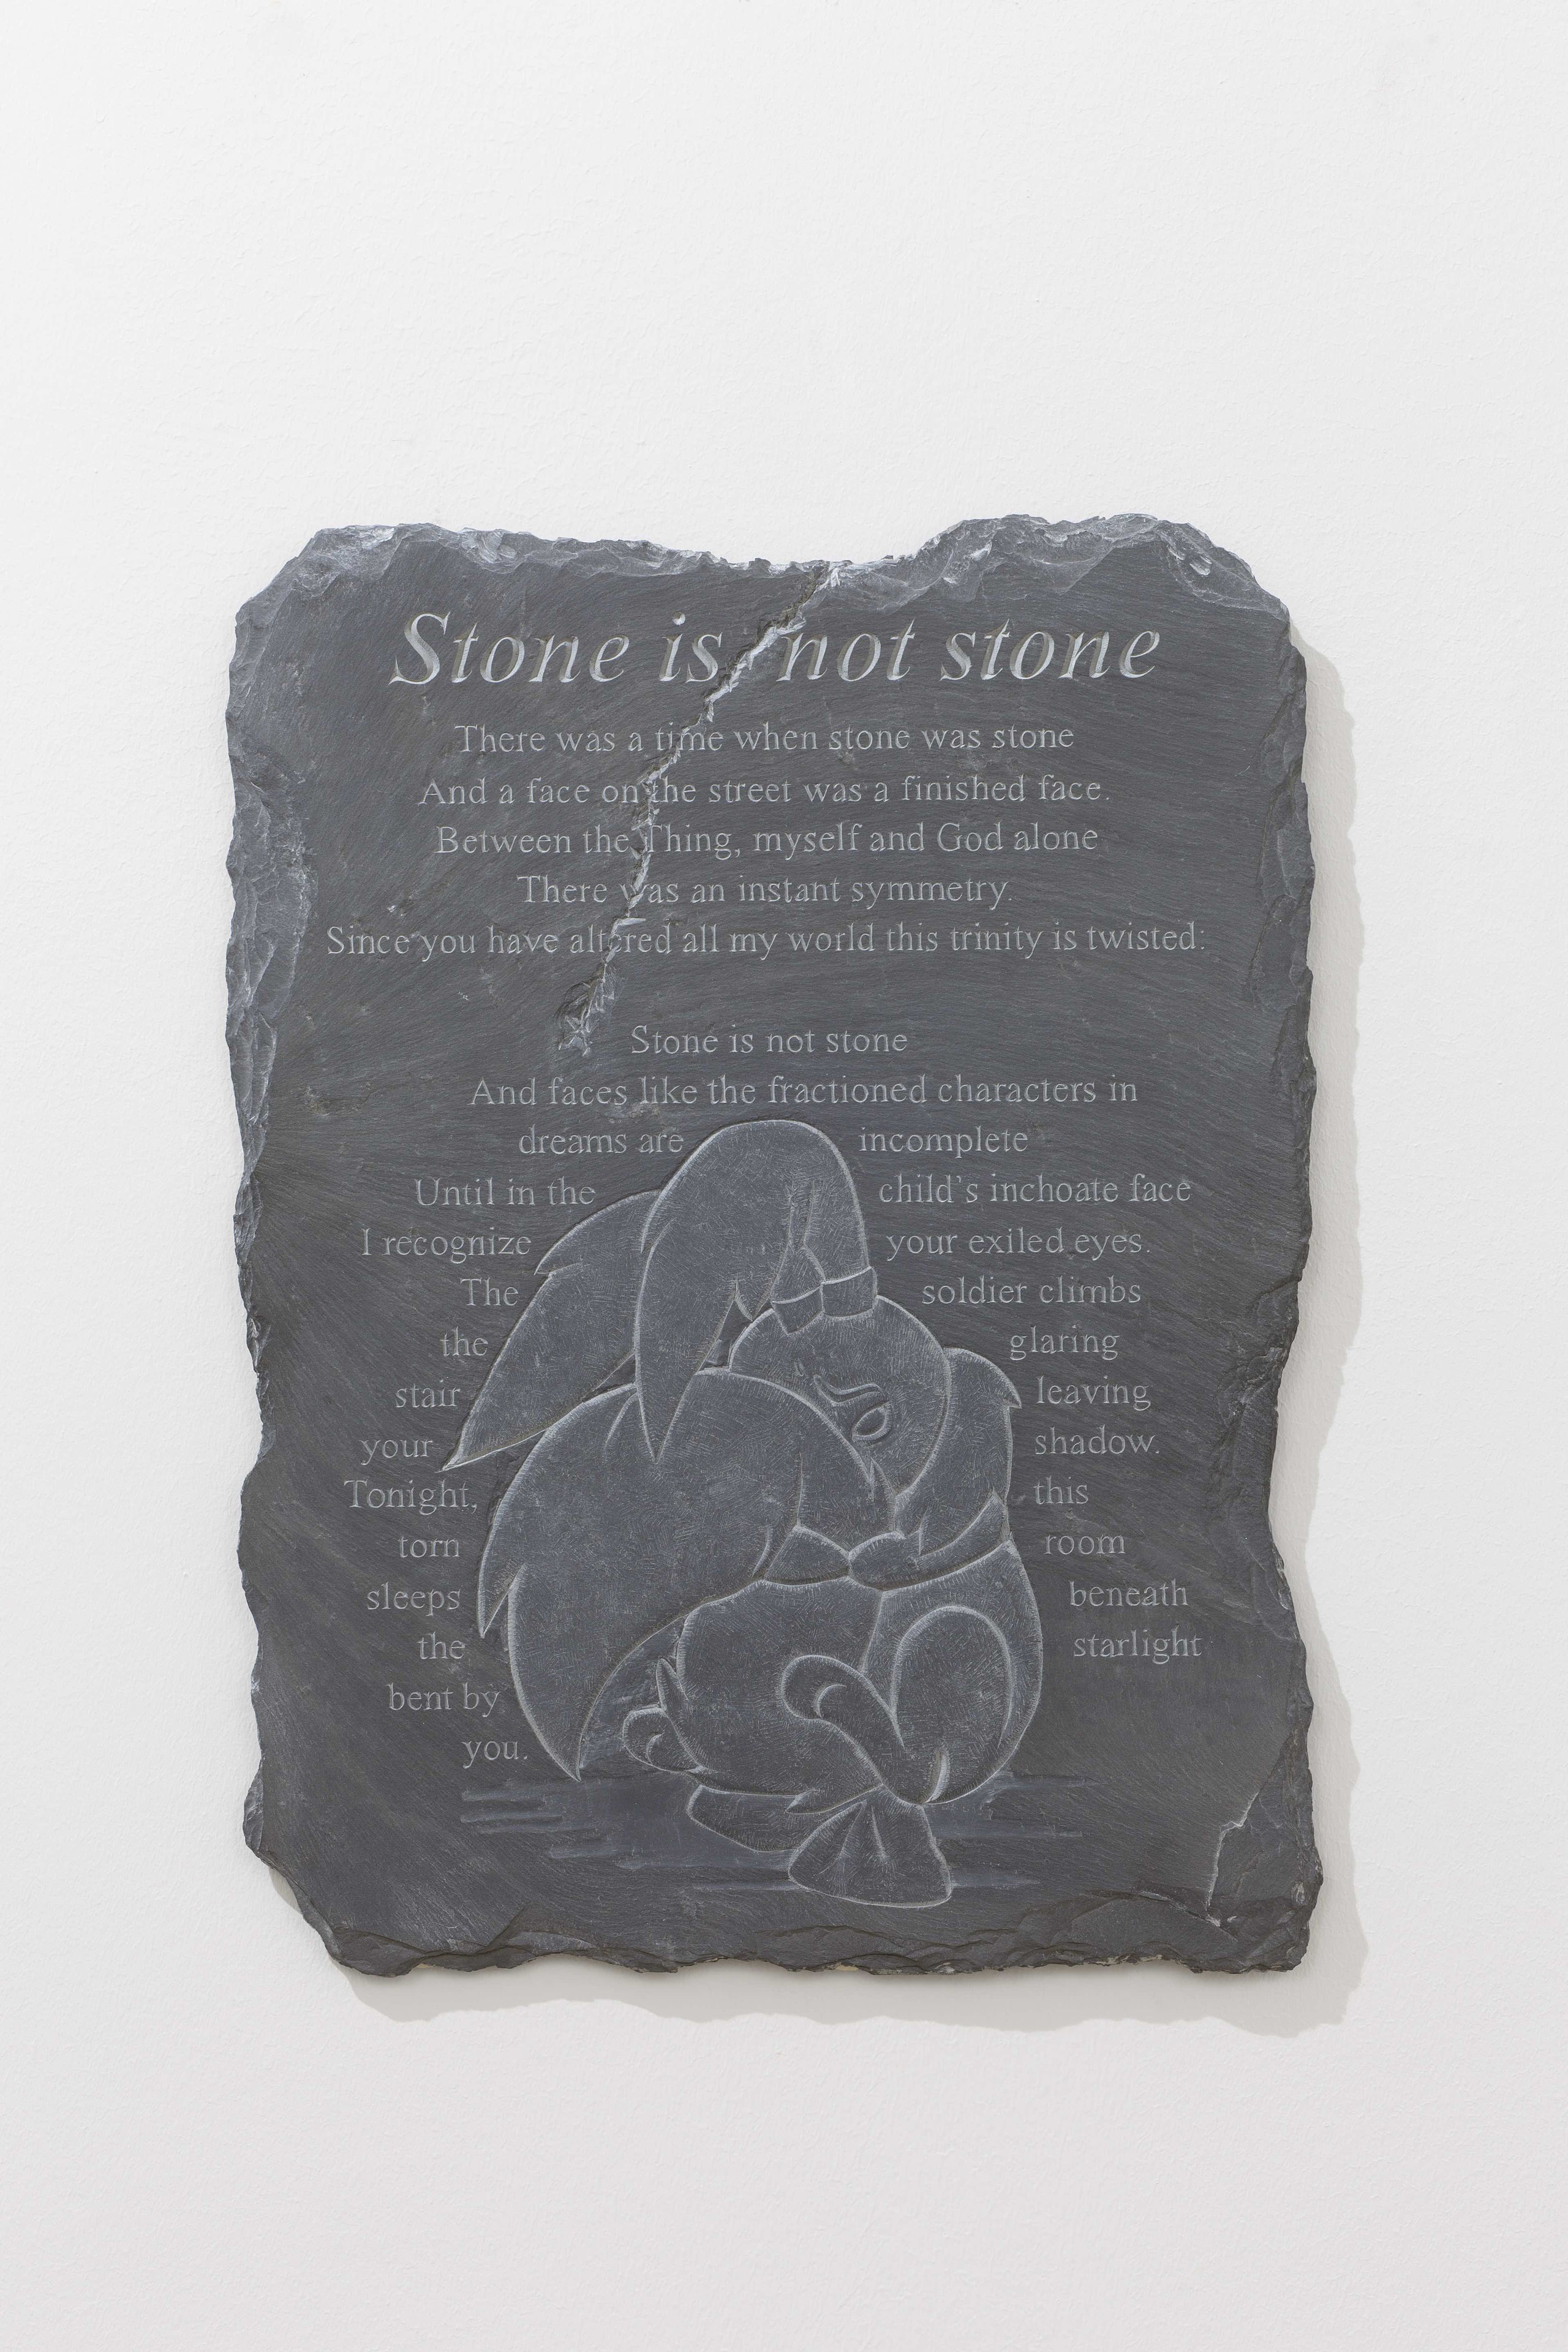 Bunny Rogers, Untitled, 2015, Carved slate stone, 59 x 43 x 0.6 cm/ 23.25 x 17 x 0.25 inches